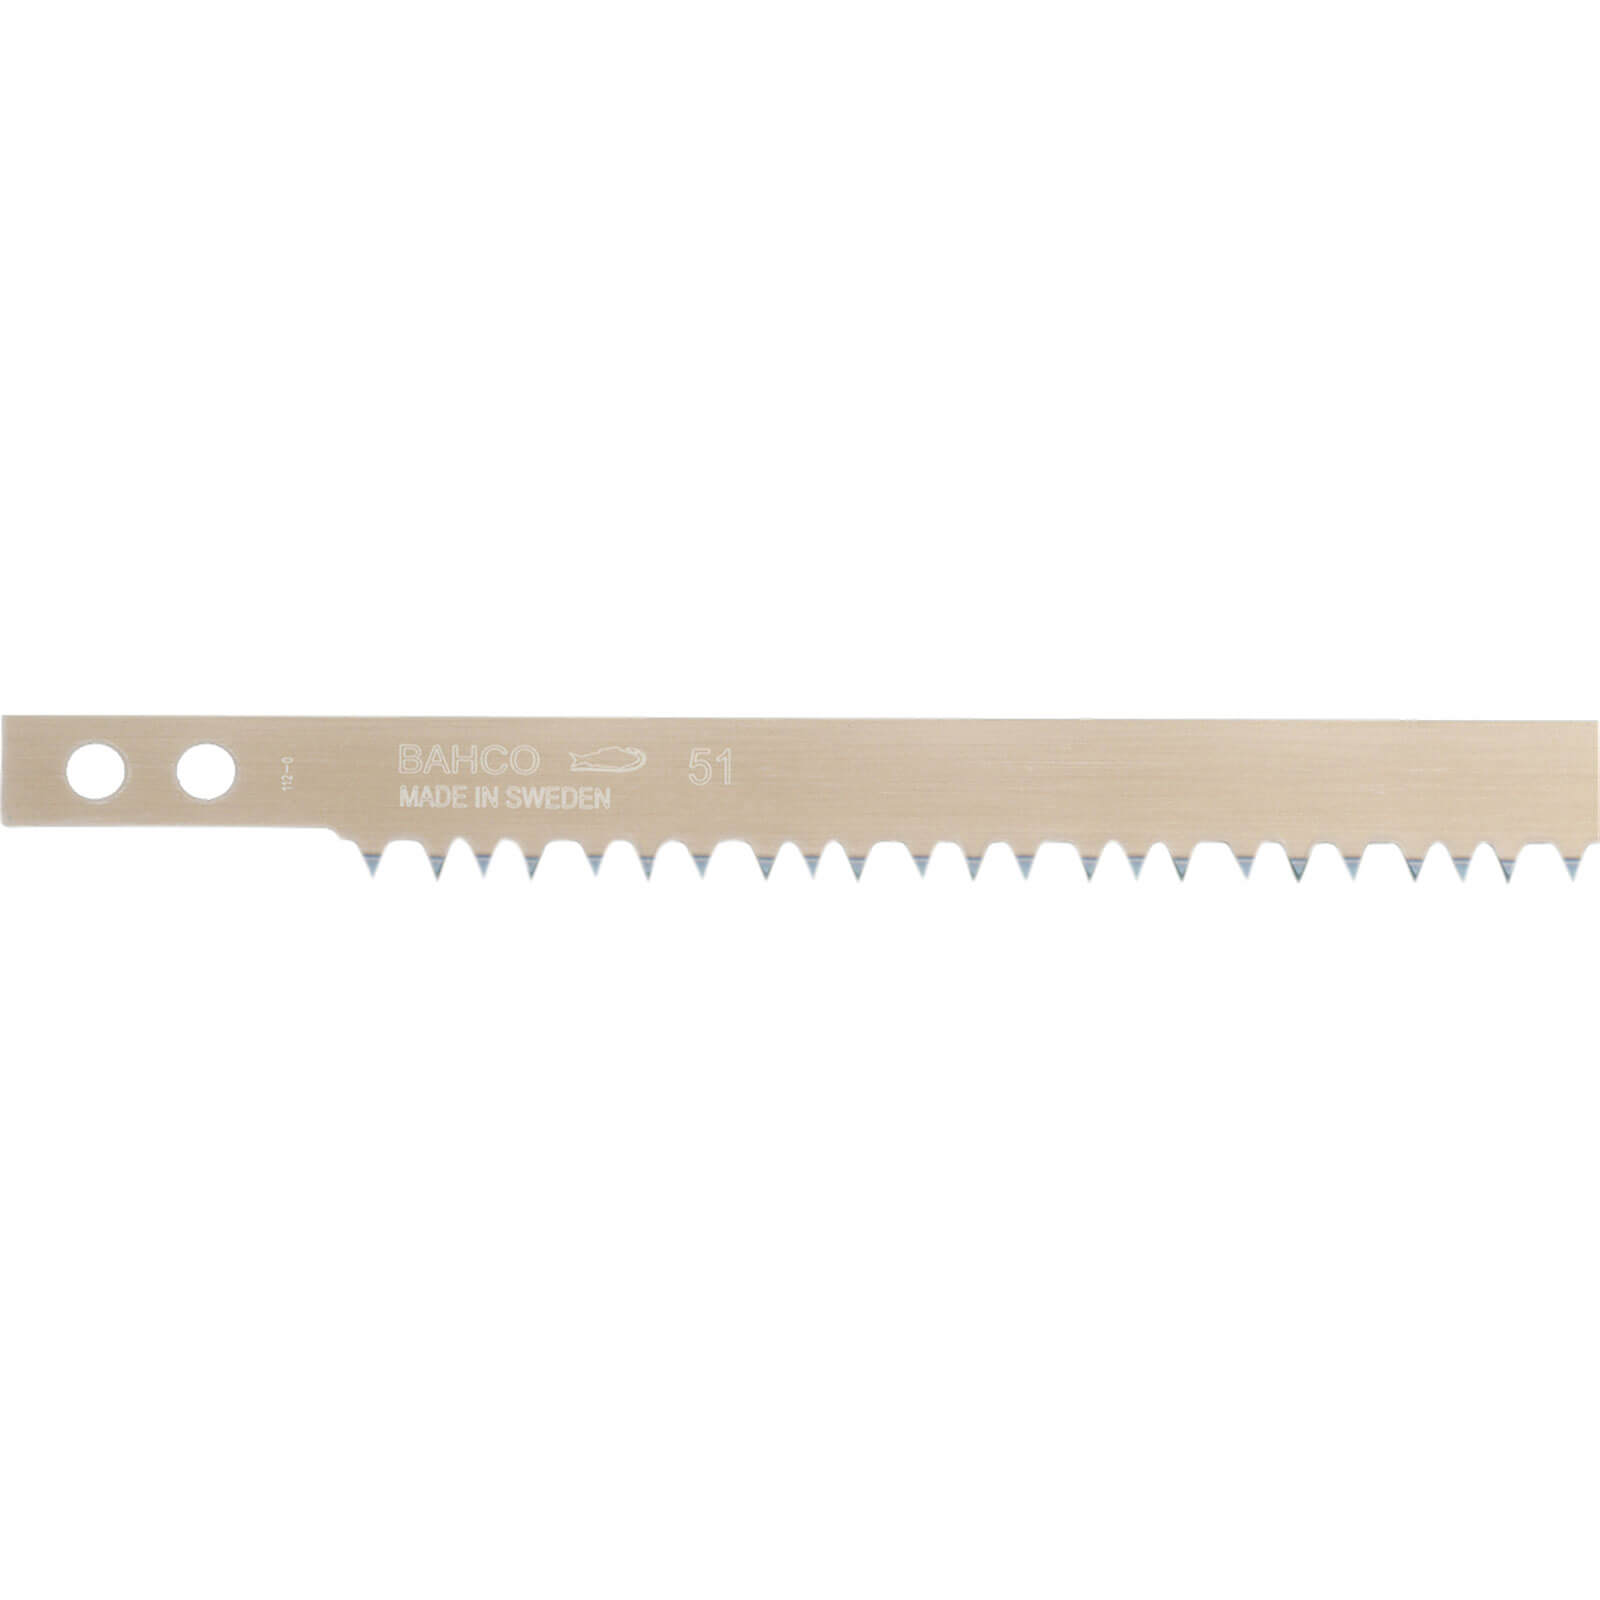 Bahco 21 Tooth Hard Point Bowsaw Blade 21&quot / 530mm All Purpose